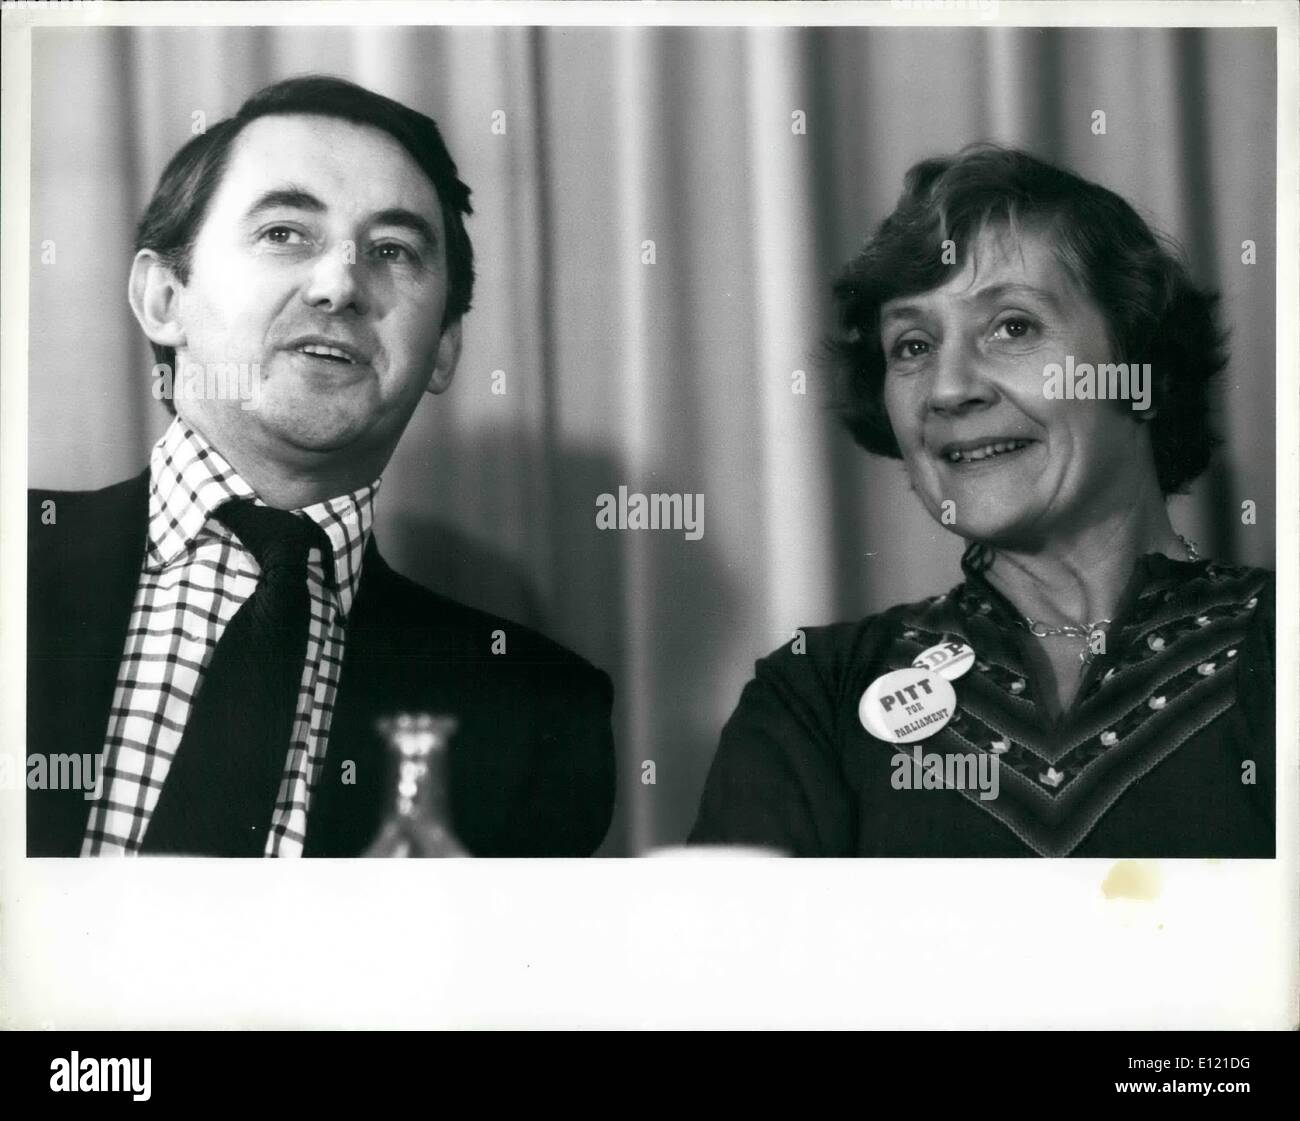 Oct. 10, 1981 - Croydon by-election : David steel and Shirley Williams photographed at bill pitt's election meeting in croydon last night. the croydon by -election takes place tomorrow, Thursday. Stock Photo